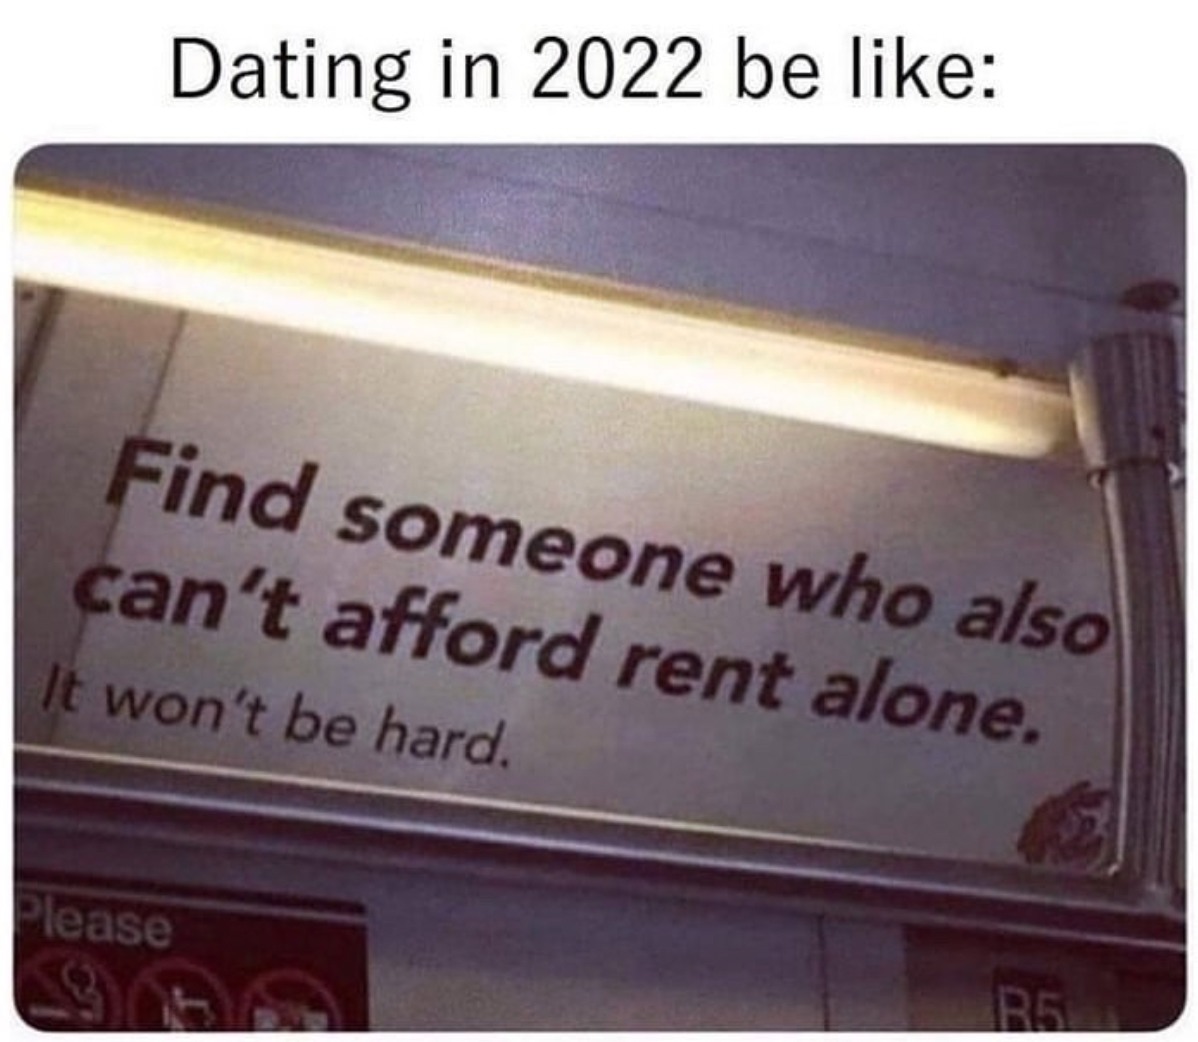 dating in 2022 be like, find someone who also can't afford rent alone, it won't be hard